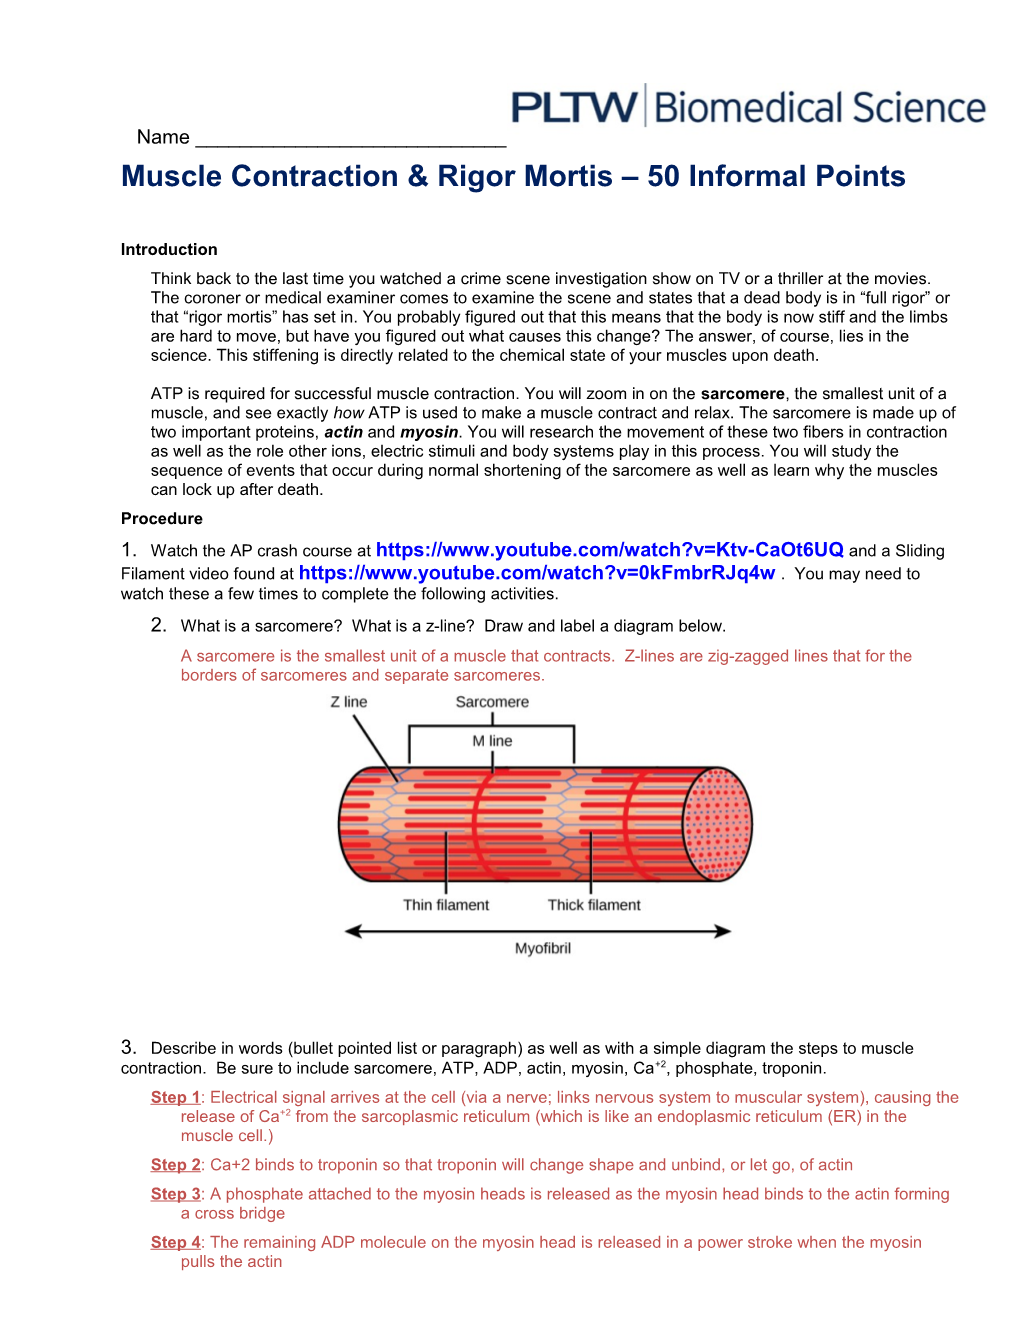 Muscle Contraction & Rigor Mortis 50 Informal Points